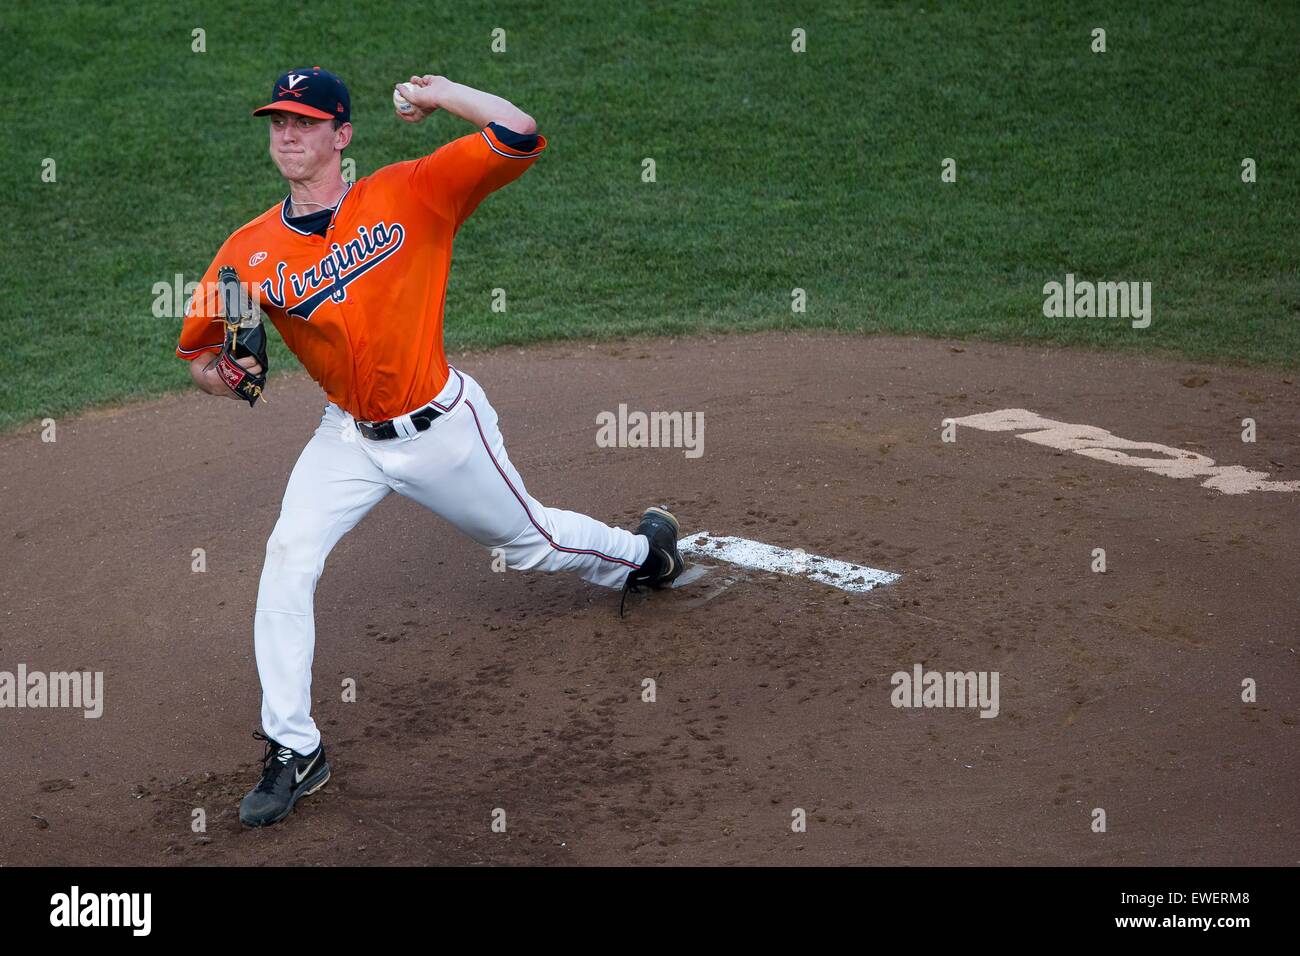 Omaha, NE, USA. 24th June, 2015. Virginia pitcher Brandon Waddell #20 in action during game 3 of the 2015 NCAA Men's College World Series Finals between the Virginia Cavaliers and Vanderbilt Commodores at TD Ameritrade Park in Omaha, NE.Nathan Olsen/Cal Sport Media/Alamy Live News Stock Photo